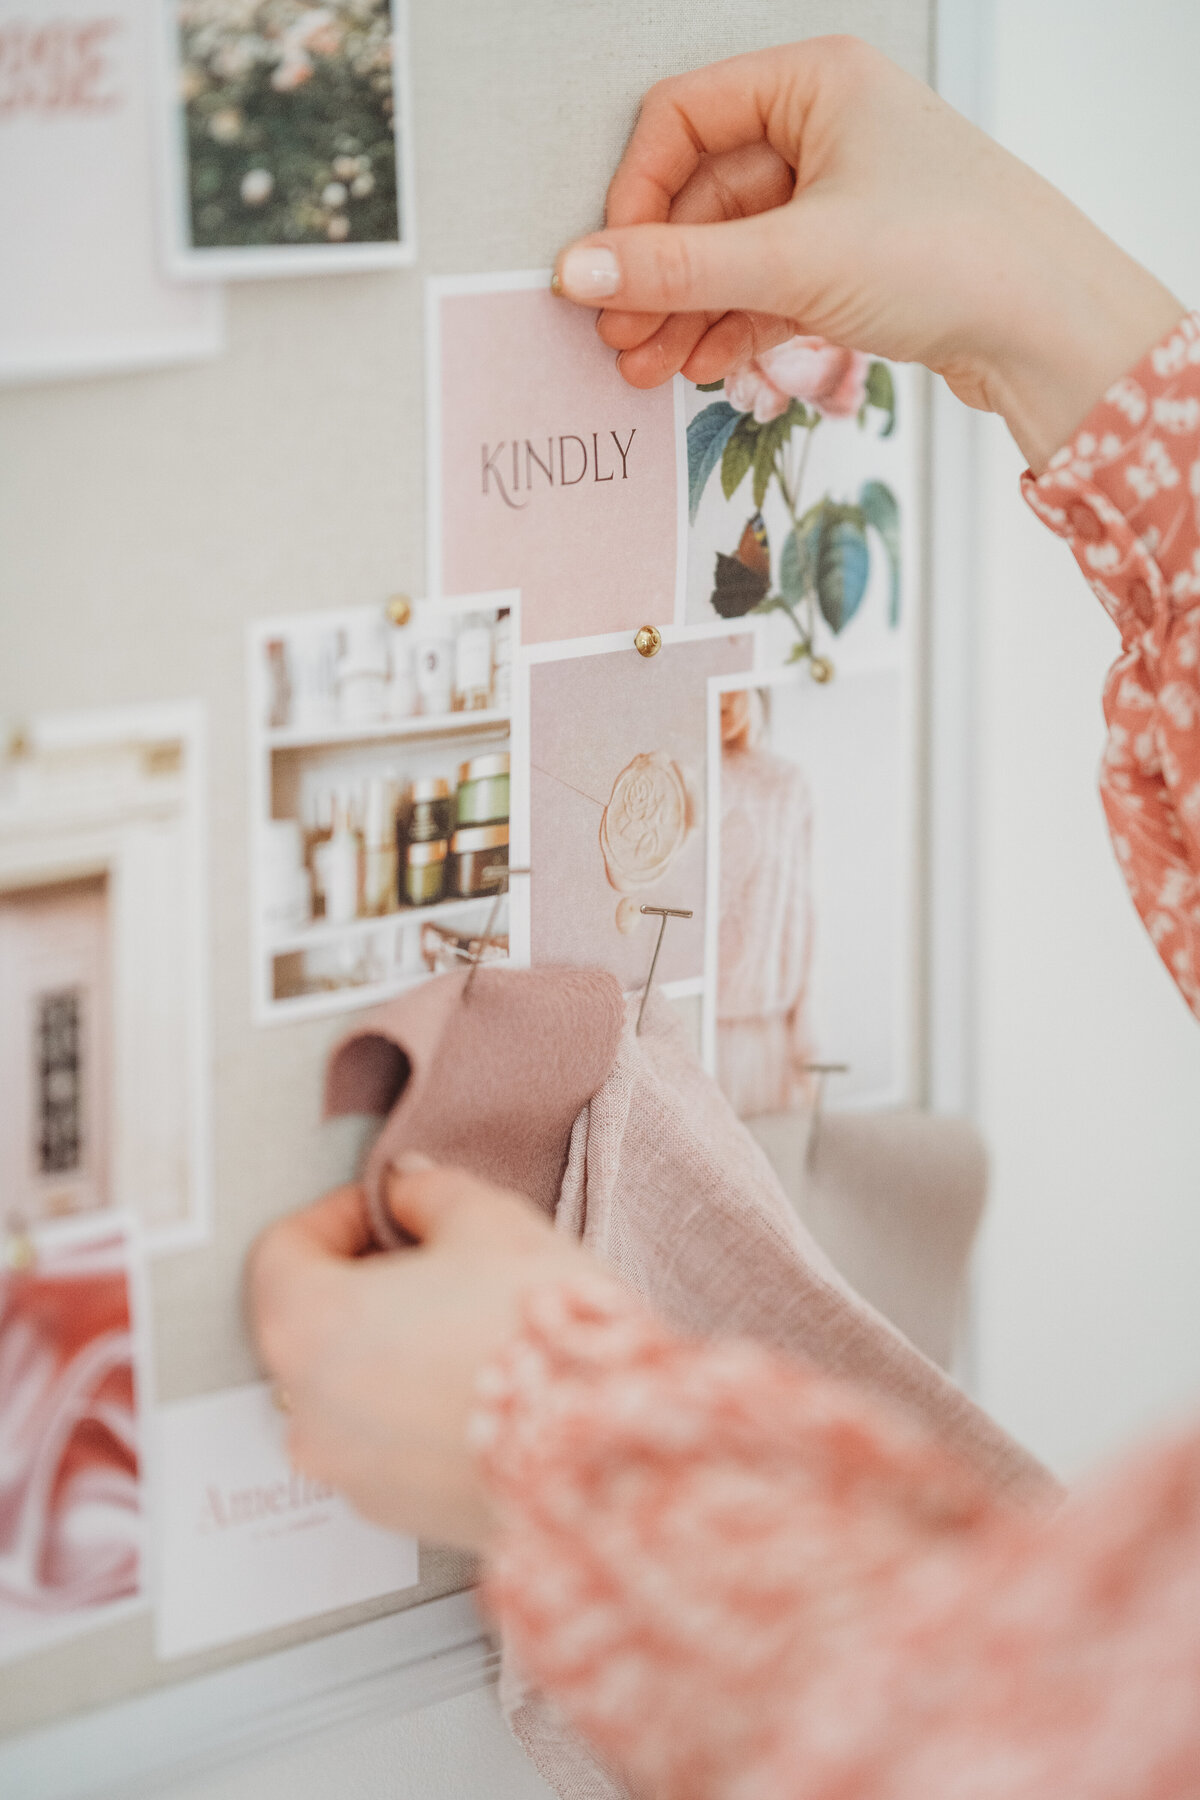 Feminine moodboard design with blush-toned colors, fabrics and design imagery